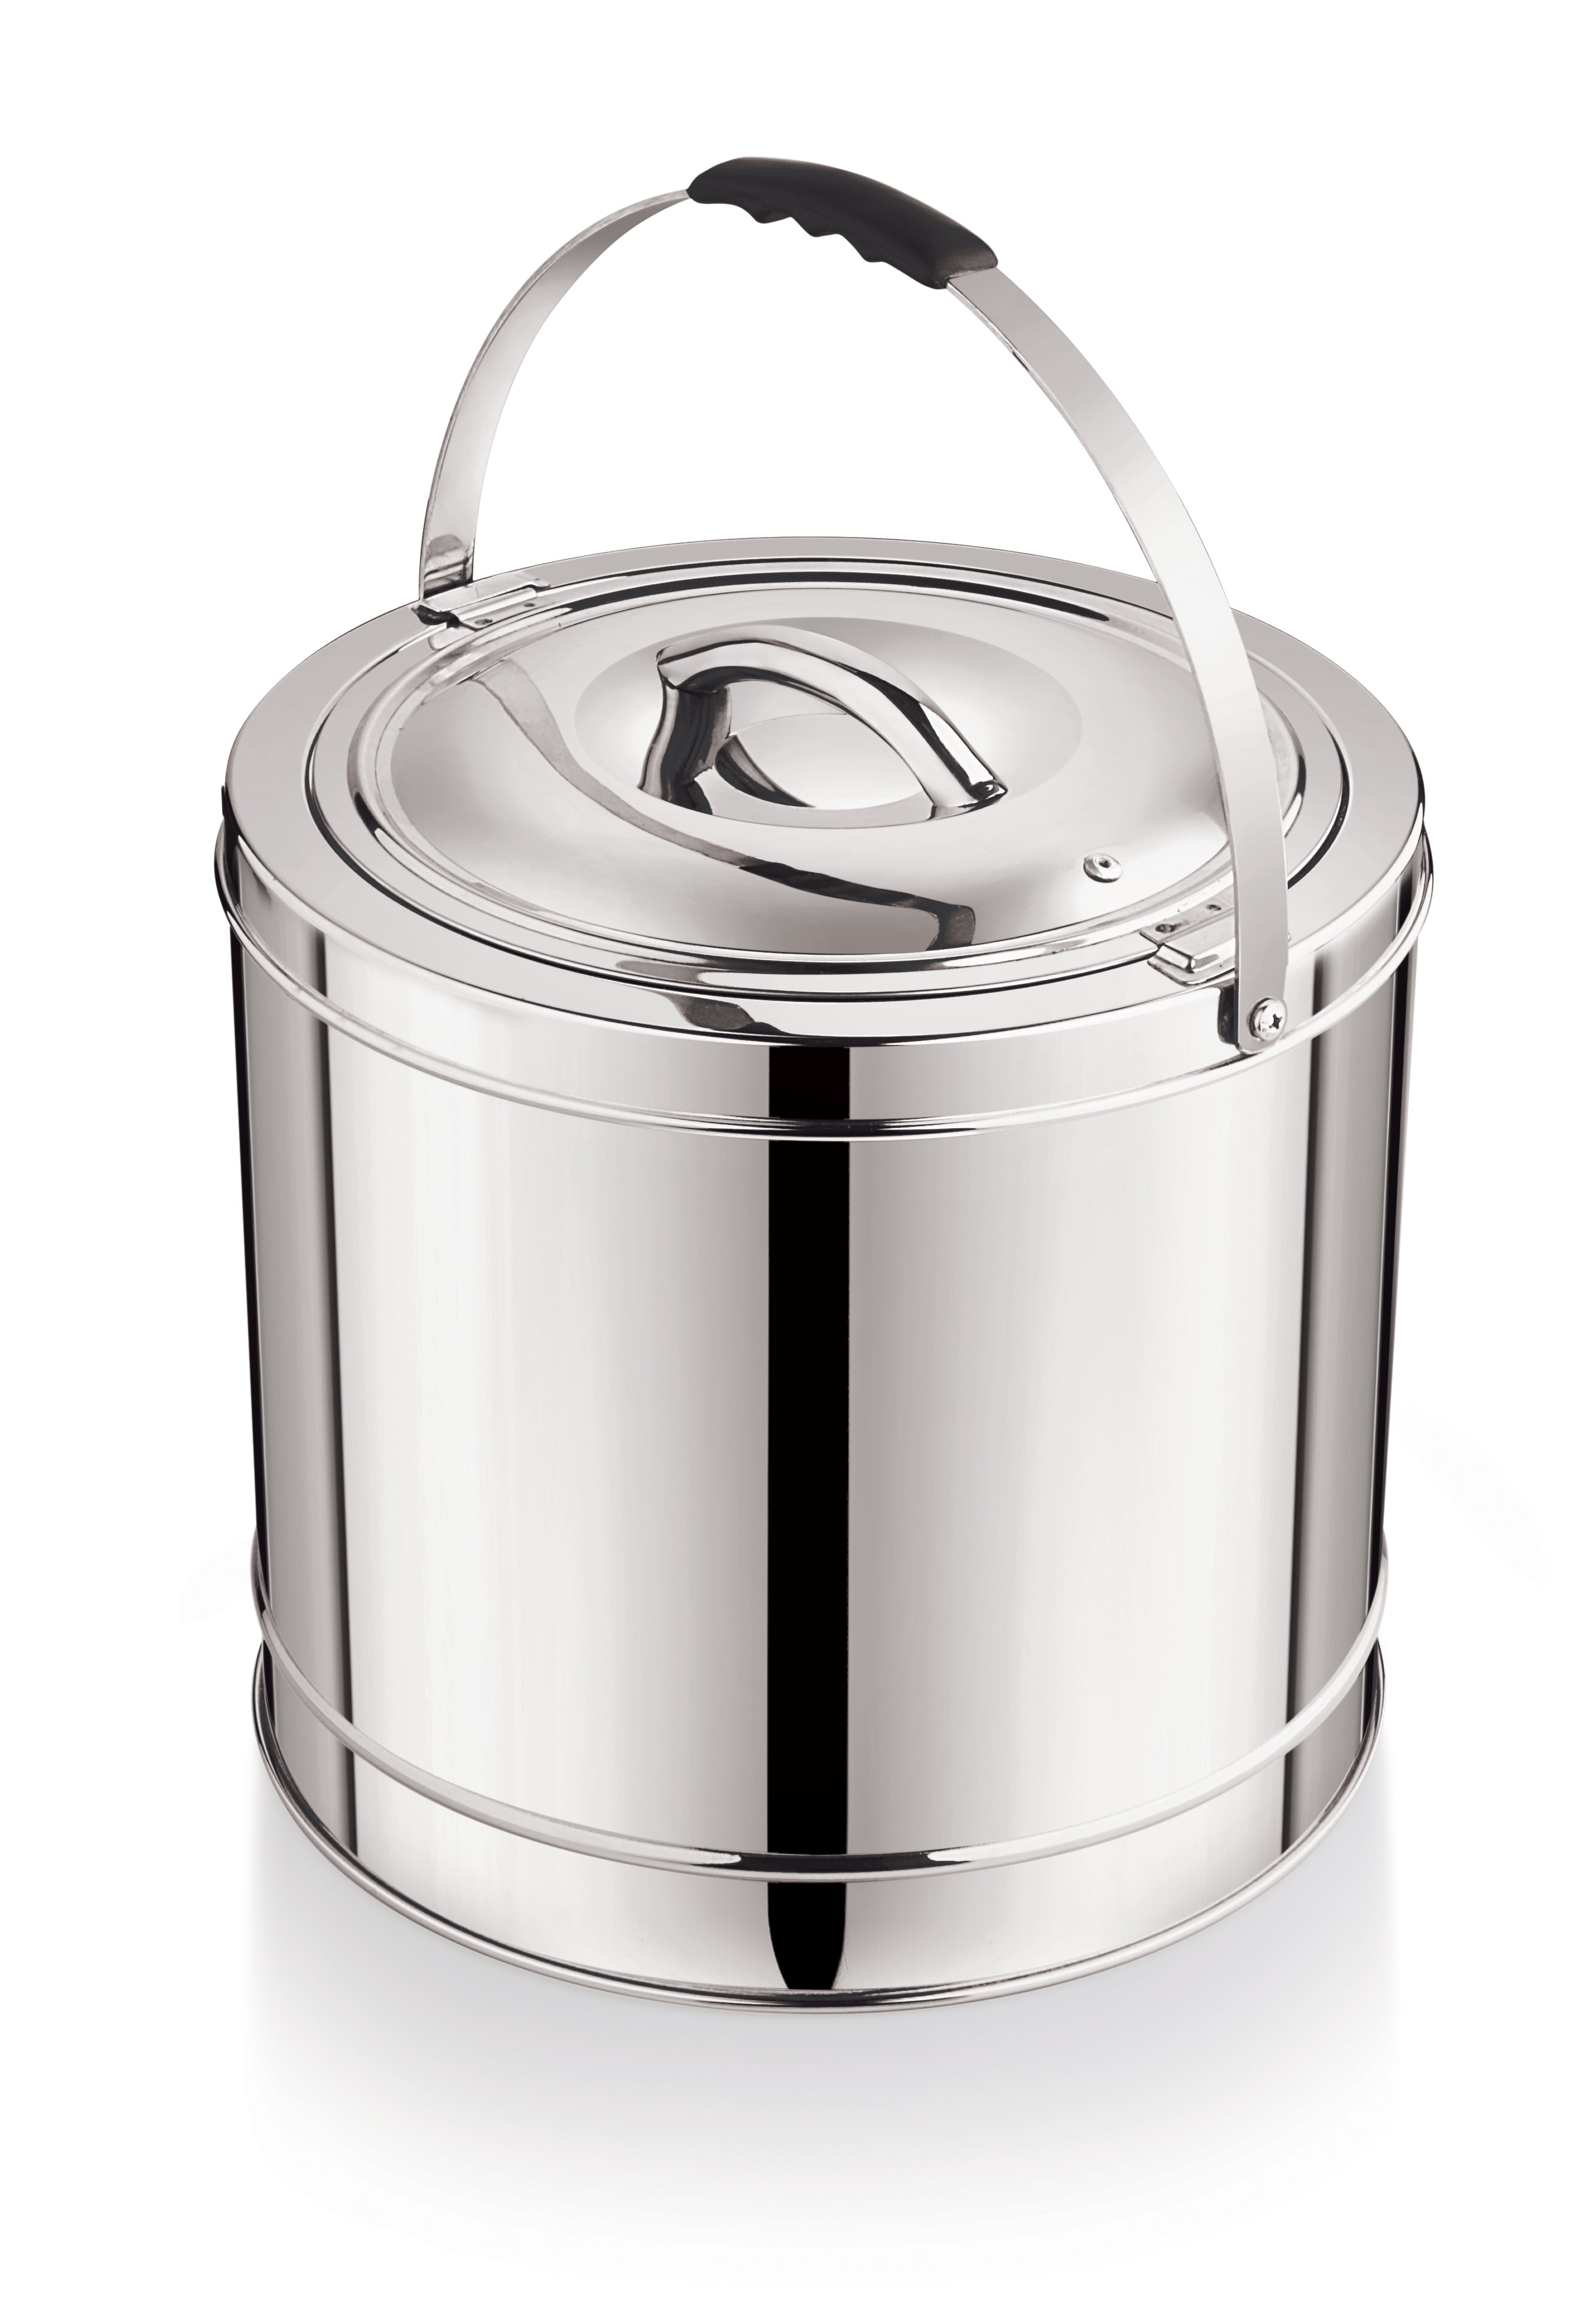 NanoNine Hot Case 15 L Double Wall PUF Insulated Stainless Steel Serving Pot with Steel Insulated Lid.